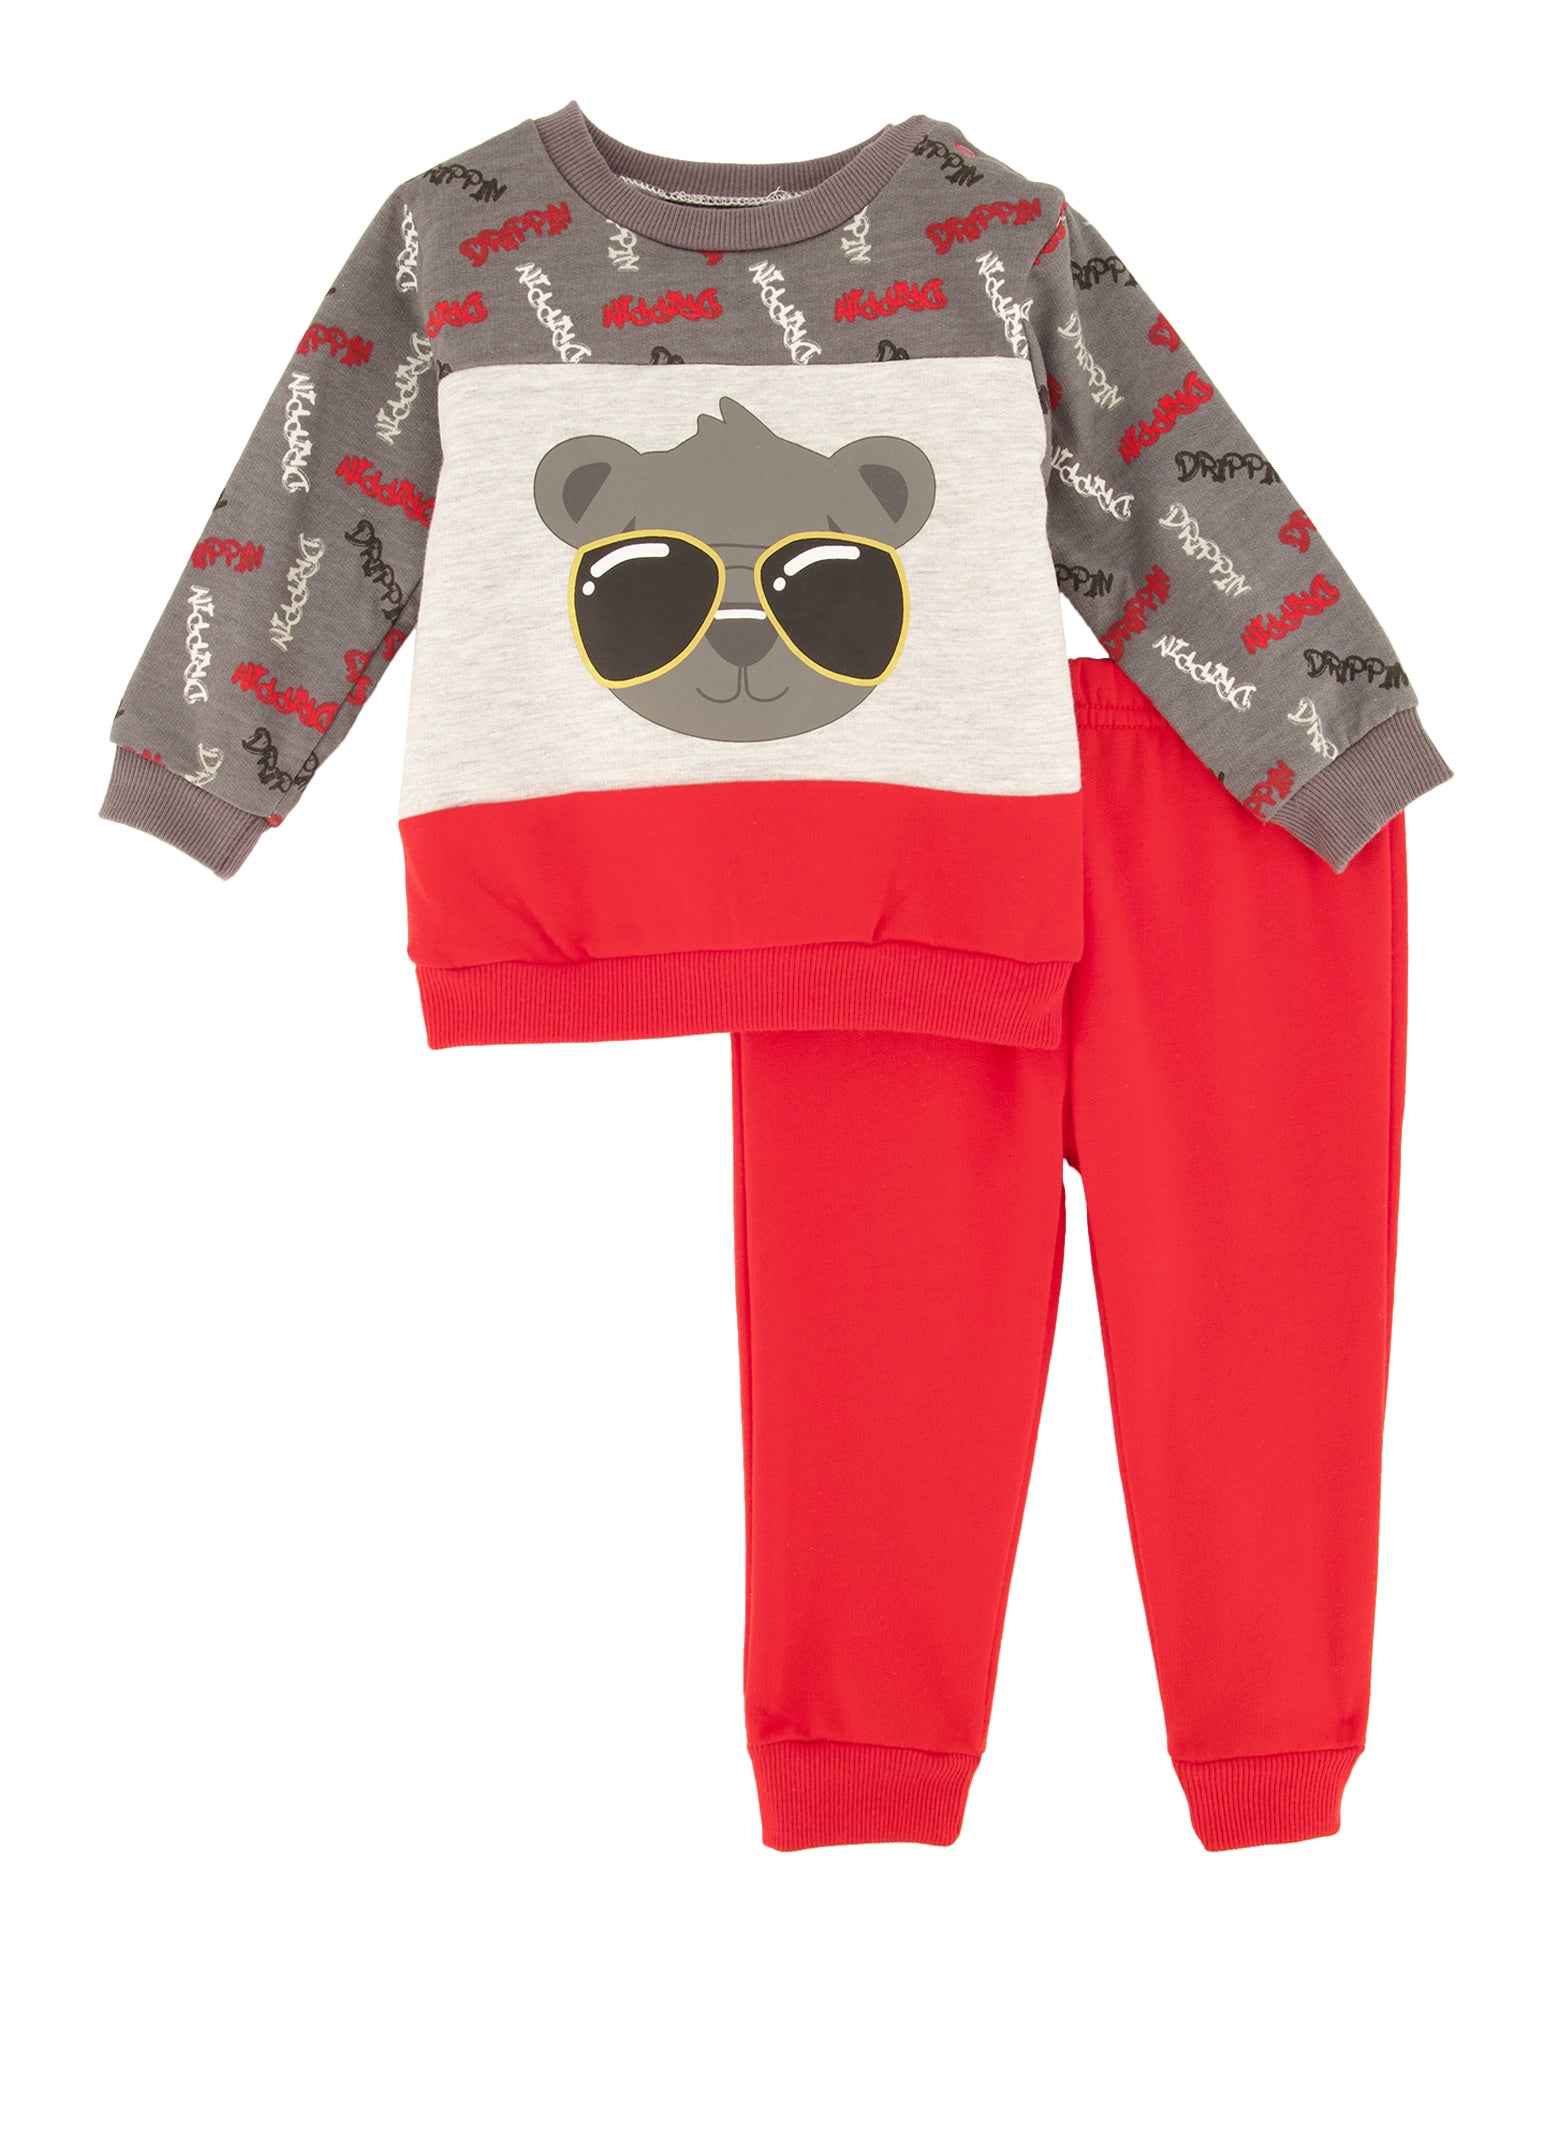 Baby Boys 12-24M Drippin Graphic Sweatshirt and Joggers, Red, Size 12M